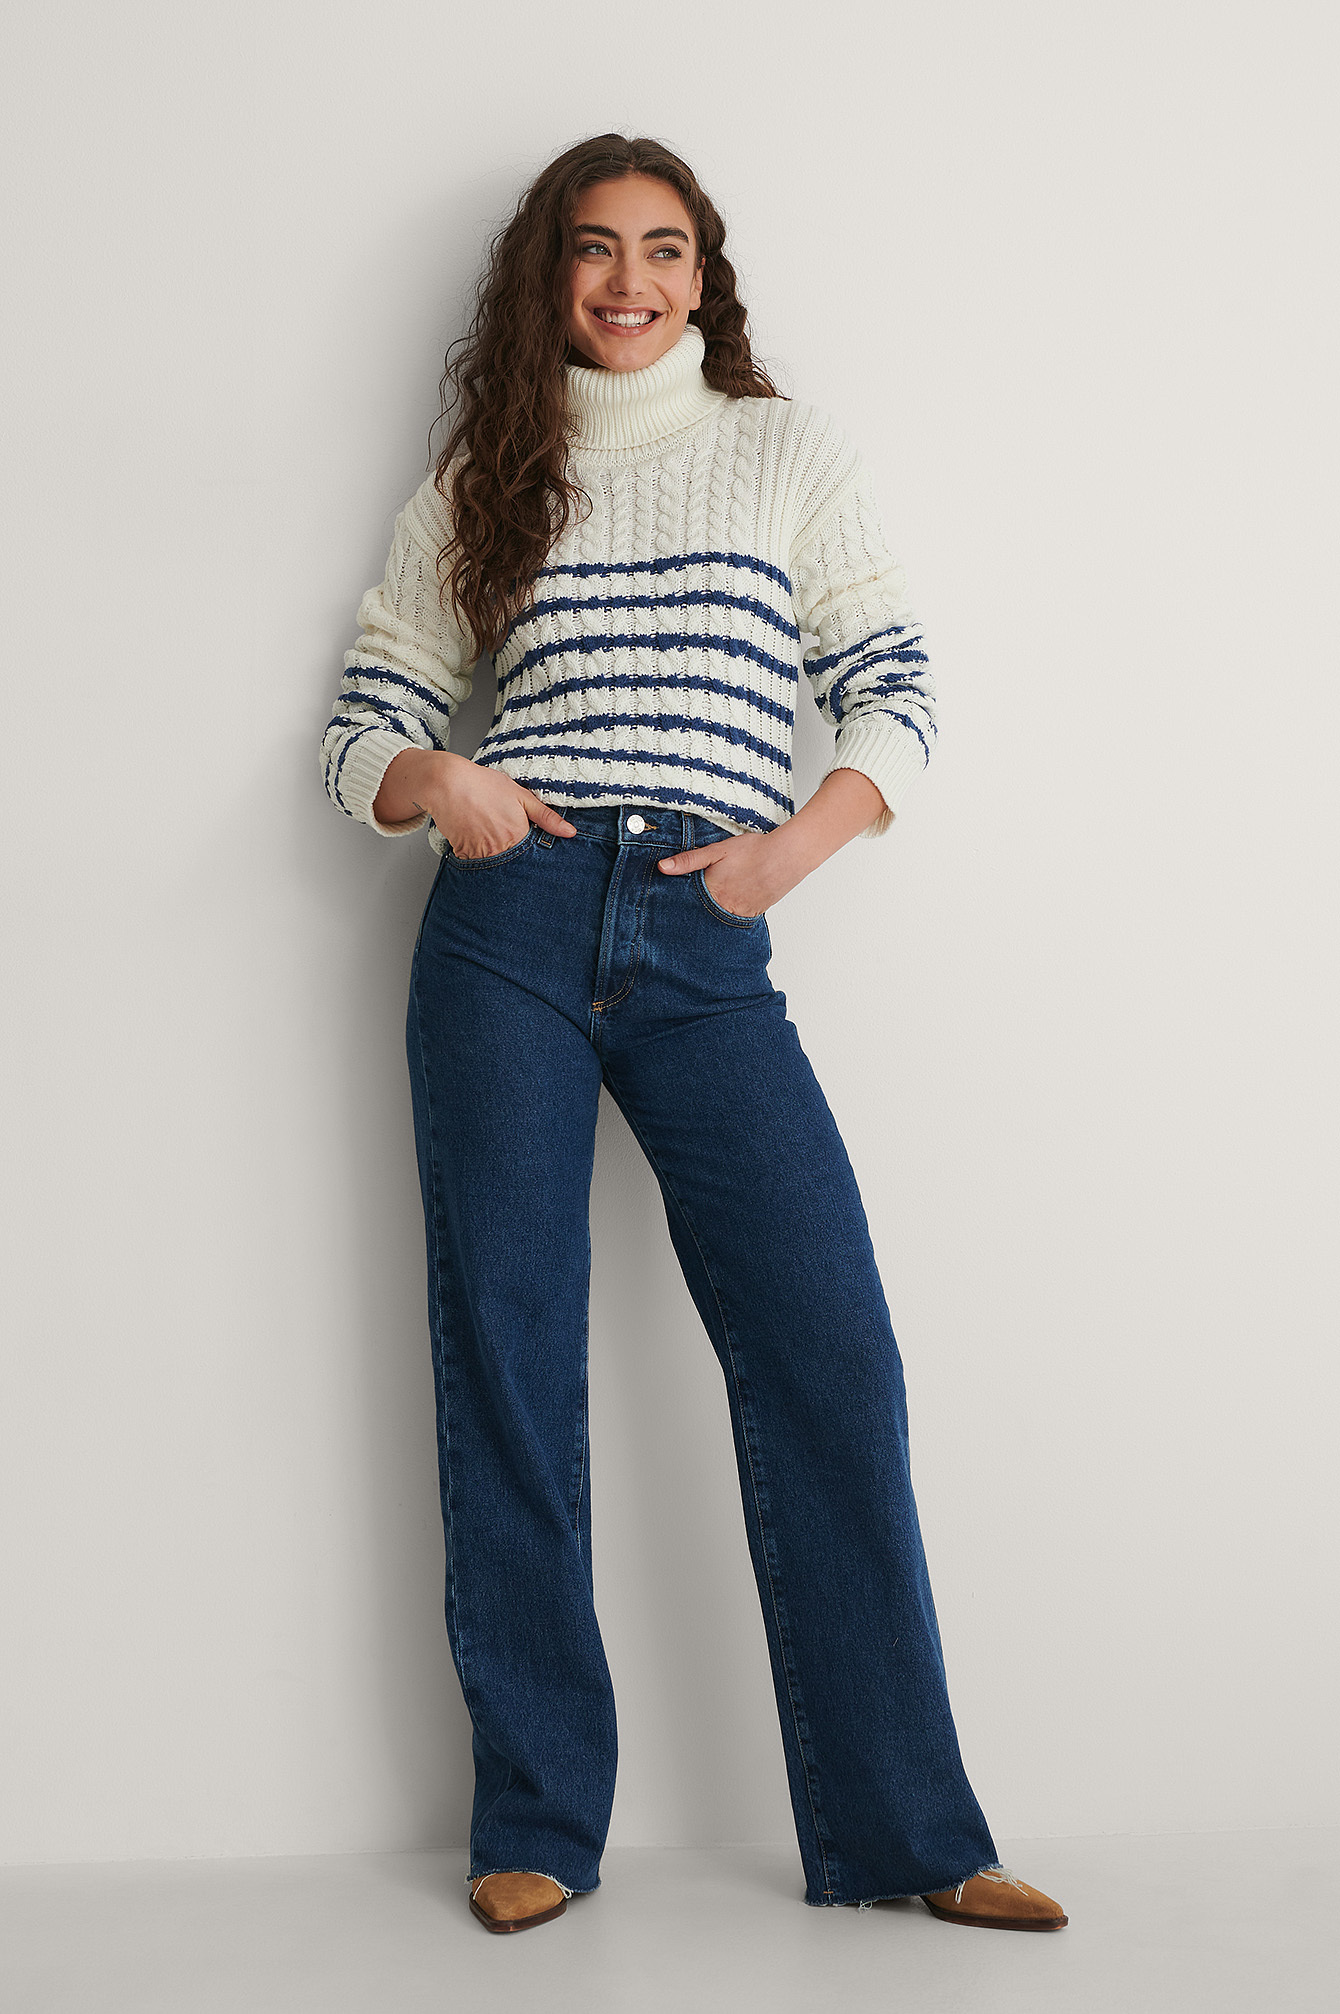 White/Navy Cable Knitted Striped Sweater